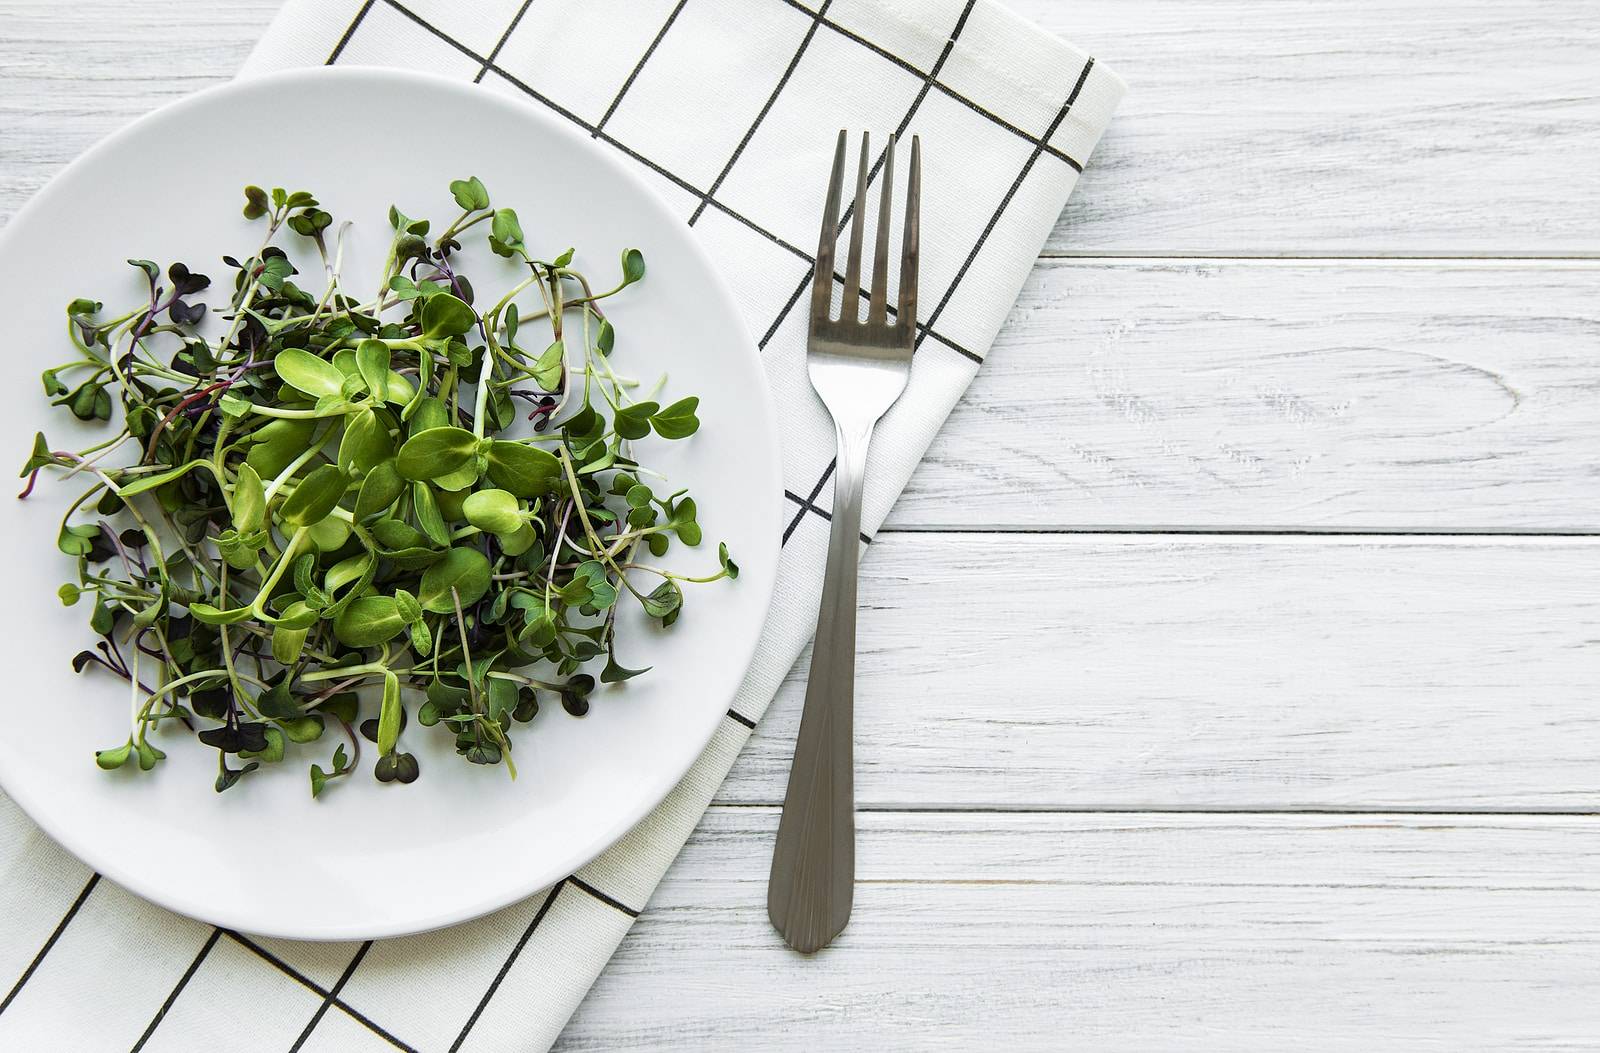 Home Grown Sprouts Are Best New Nutritional Trend